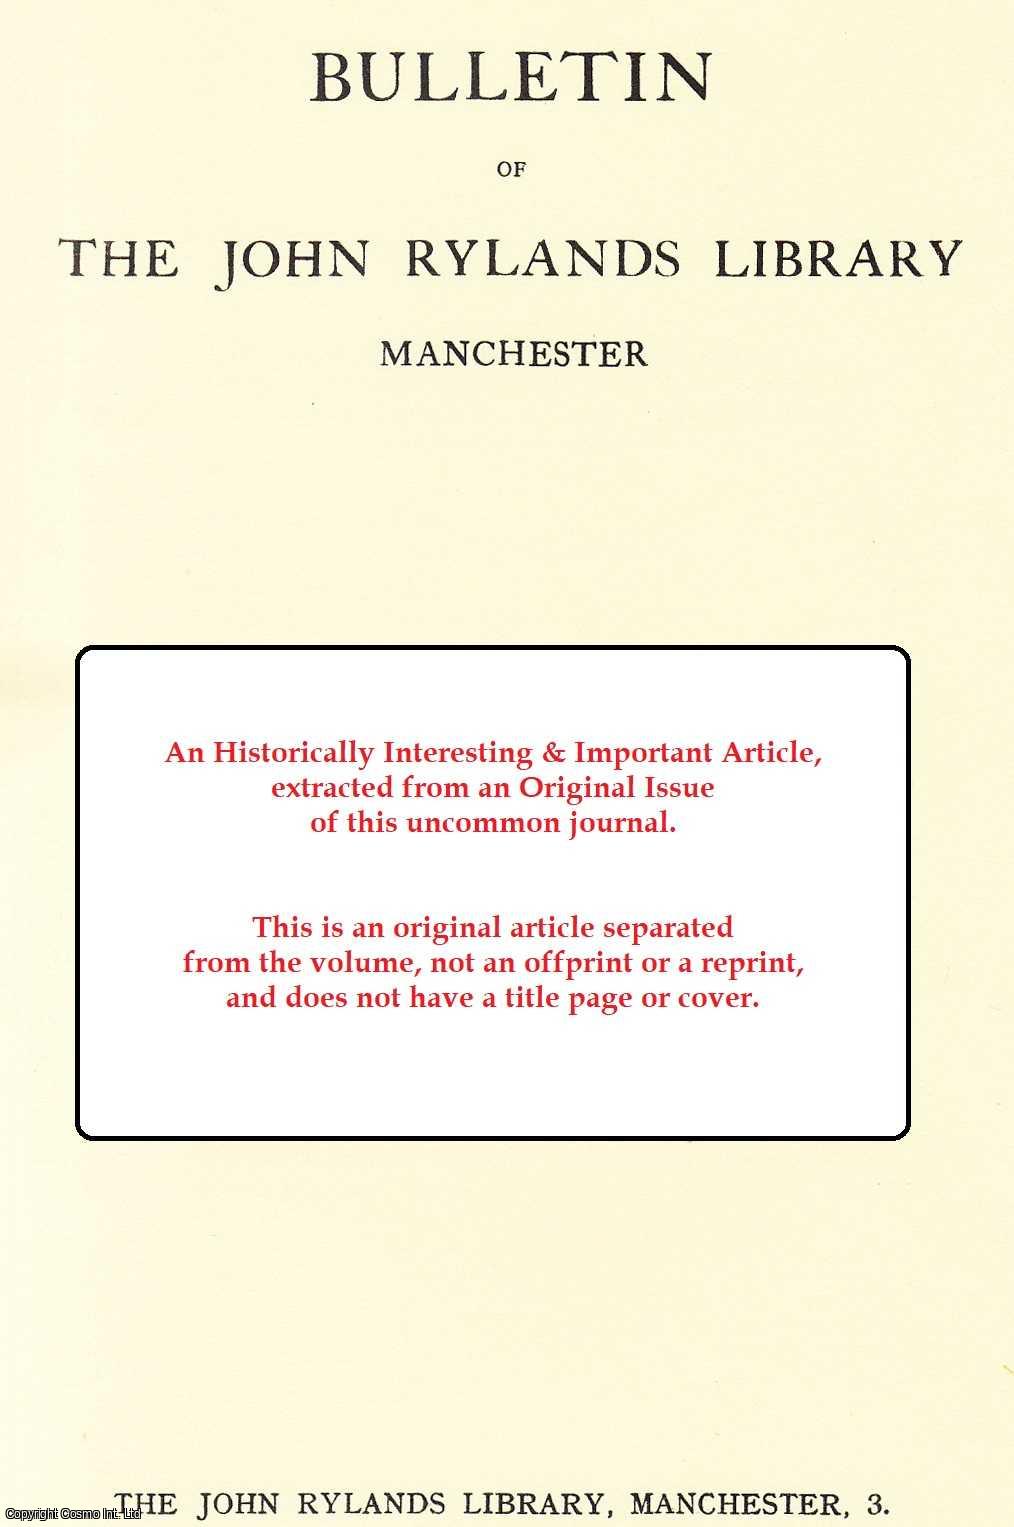 W.A. Coles - Mary Russell Mitford: The Inauguration of a Literary Career. An original article from the Bulletin of the John Rylands Library Manchester, 1957.